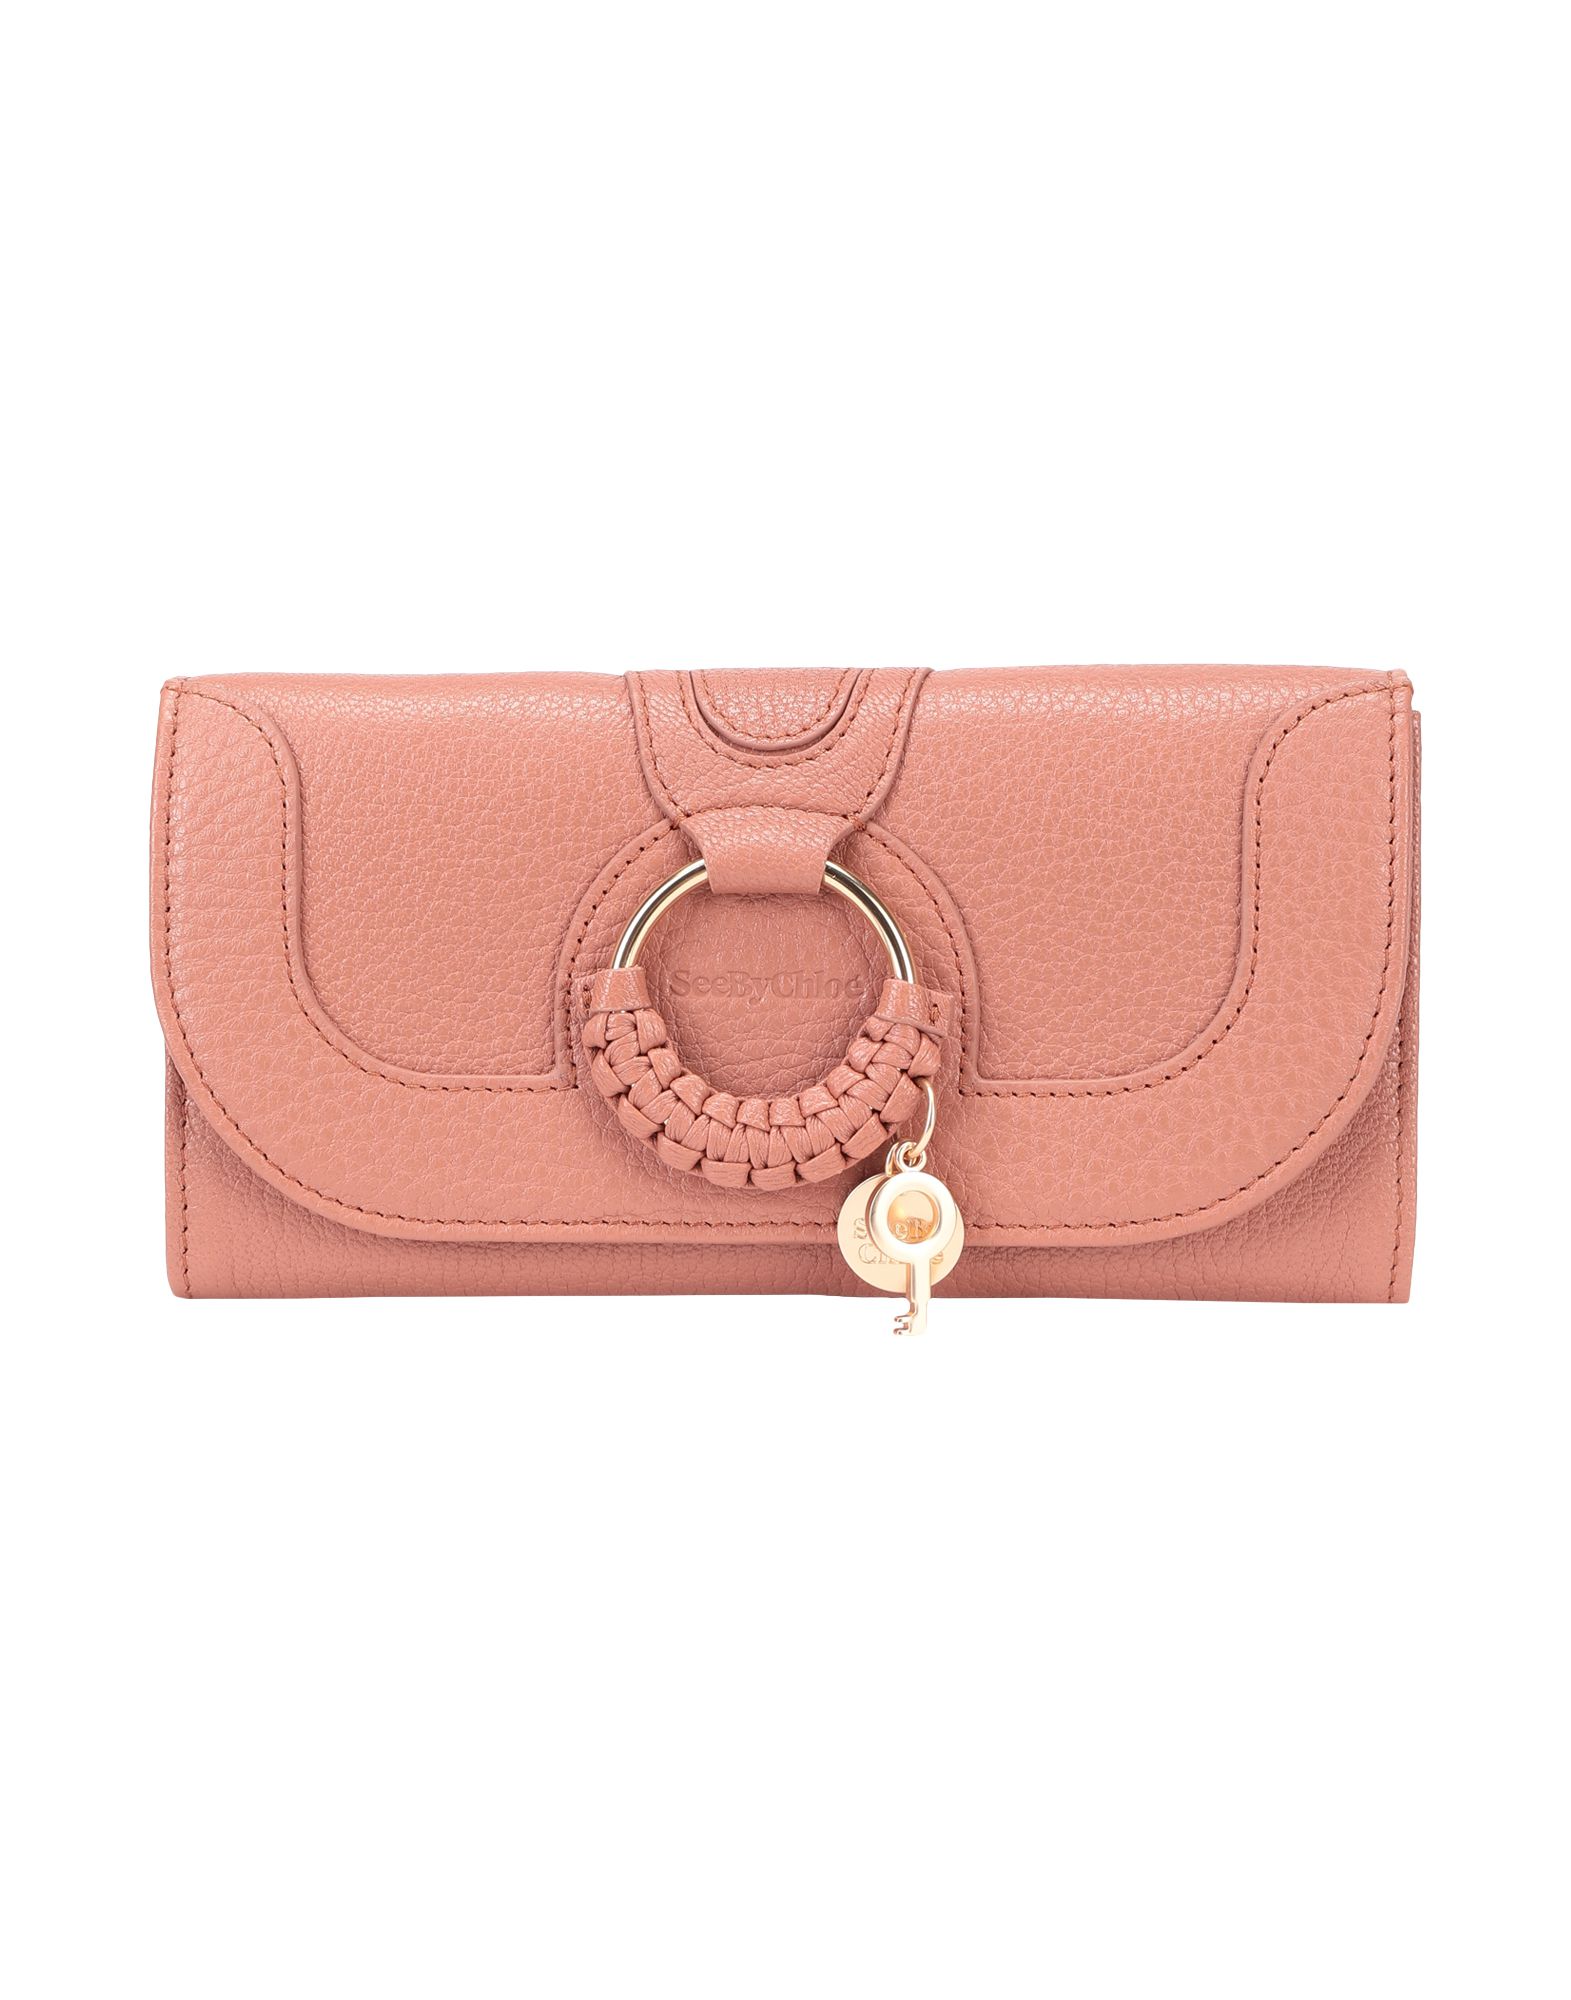 SEE BY CHLOÉ WALLET,46594169FI 1